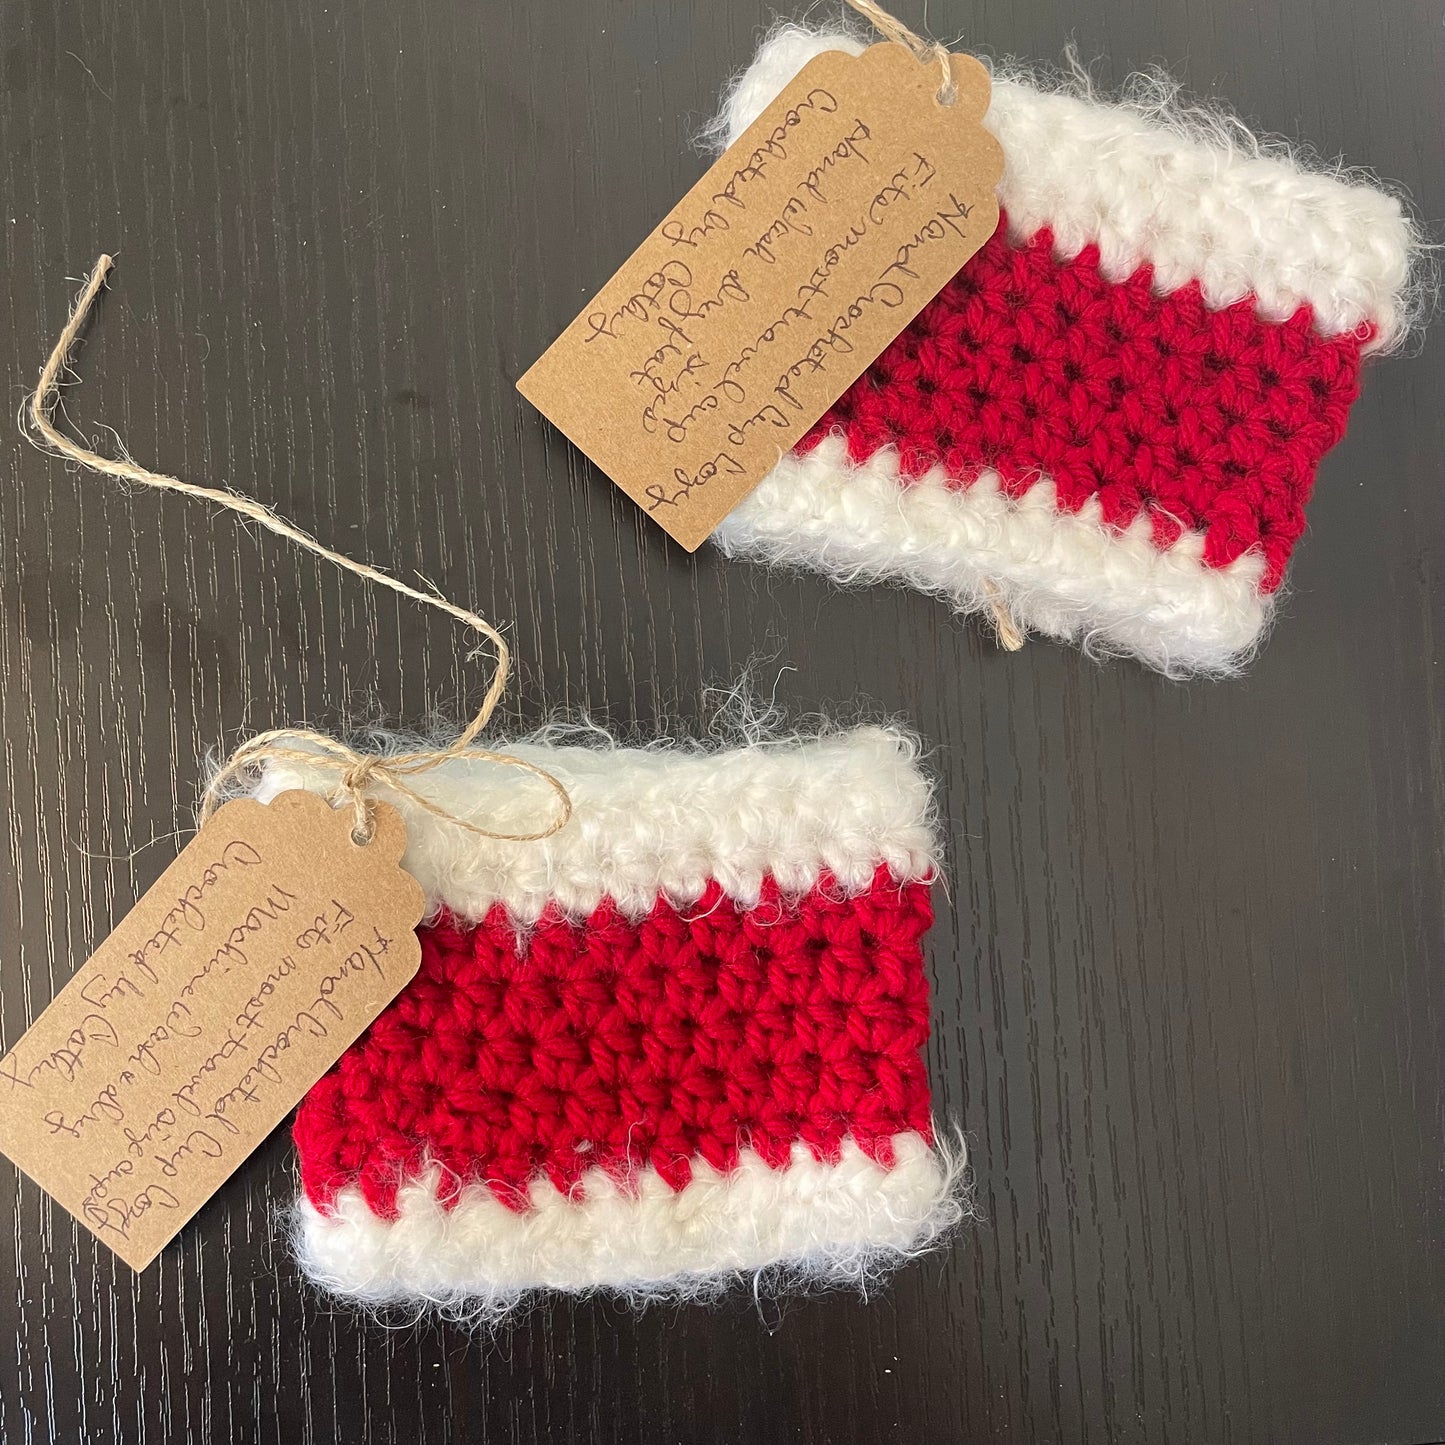 2 Pack Fuzzy Red & White Stripe Cup Can Cozies Huggies Koozies Hand Crocheted Indoor Outdoor Host Hostess Party Casual Gift Set Christmas Holiday